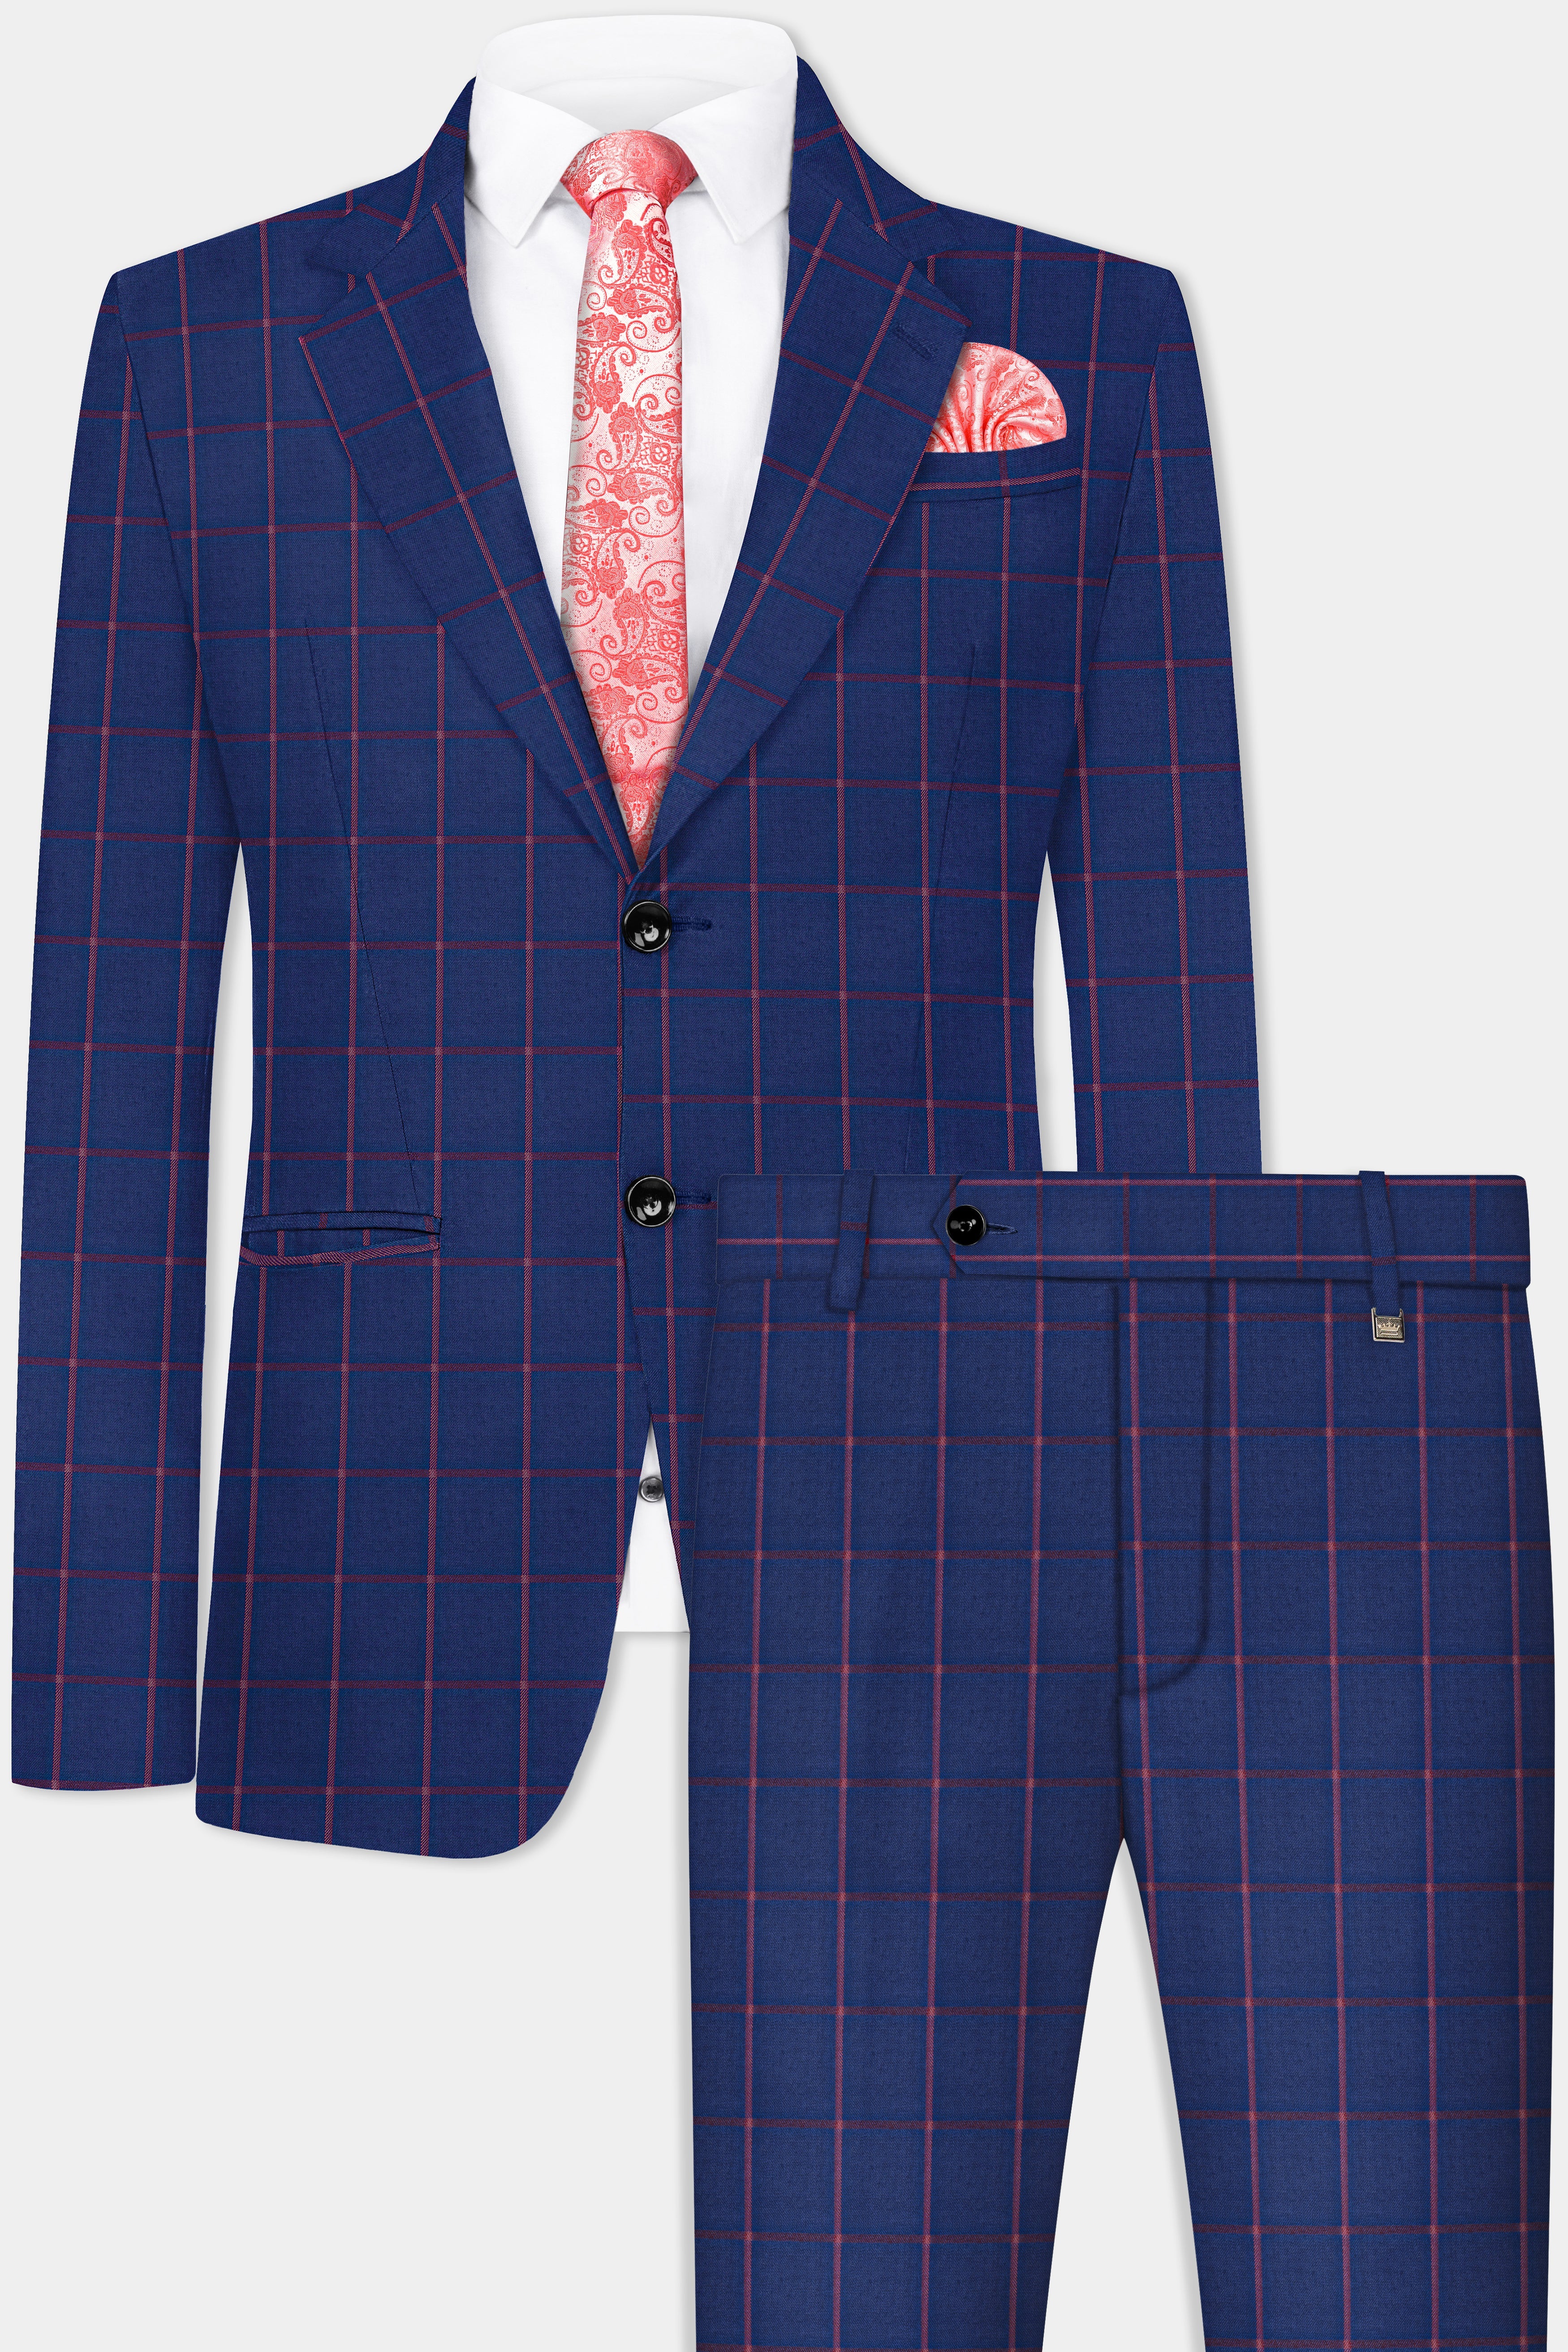 Biscay Blue with Raspberry Pink Windowpane Wool Blend Suit